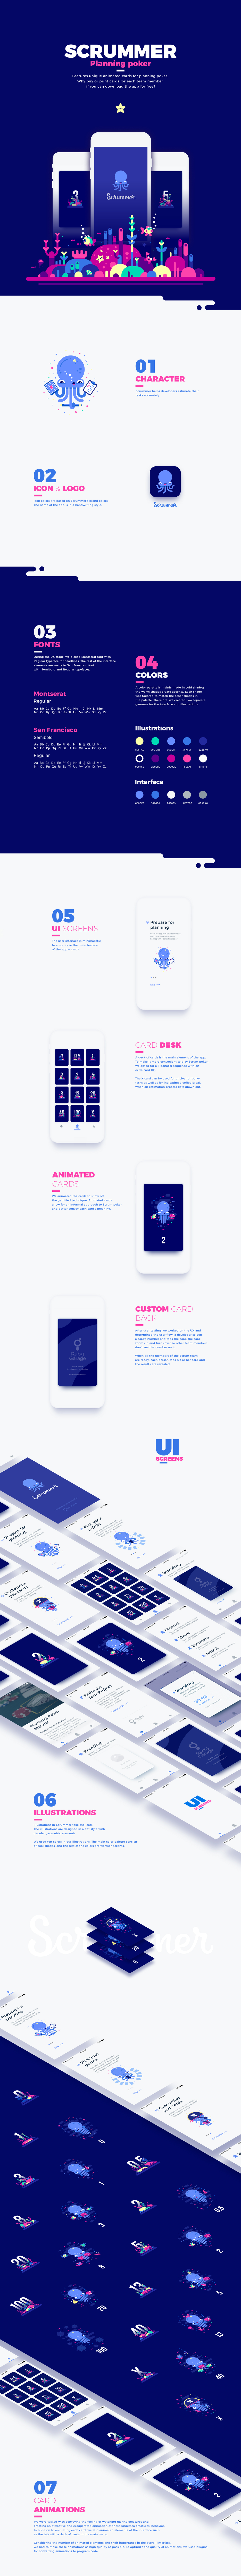 flat ios color Character free ui design UX design mobile octopus neon